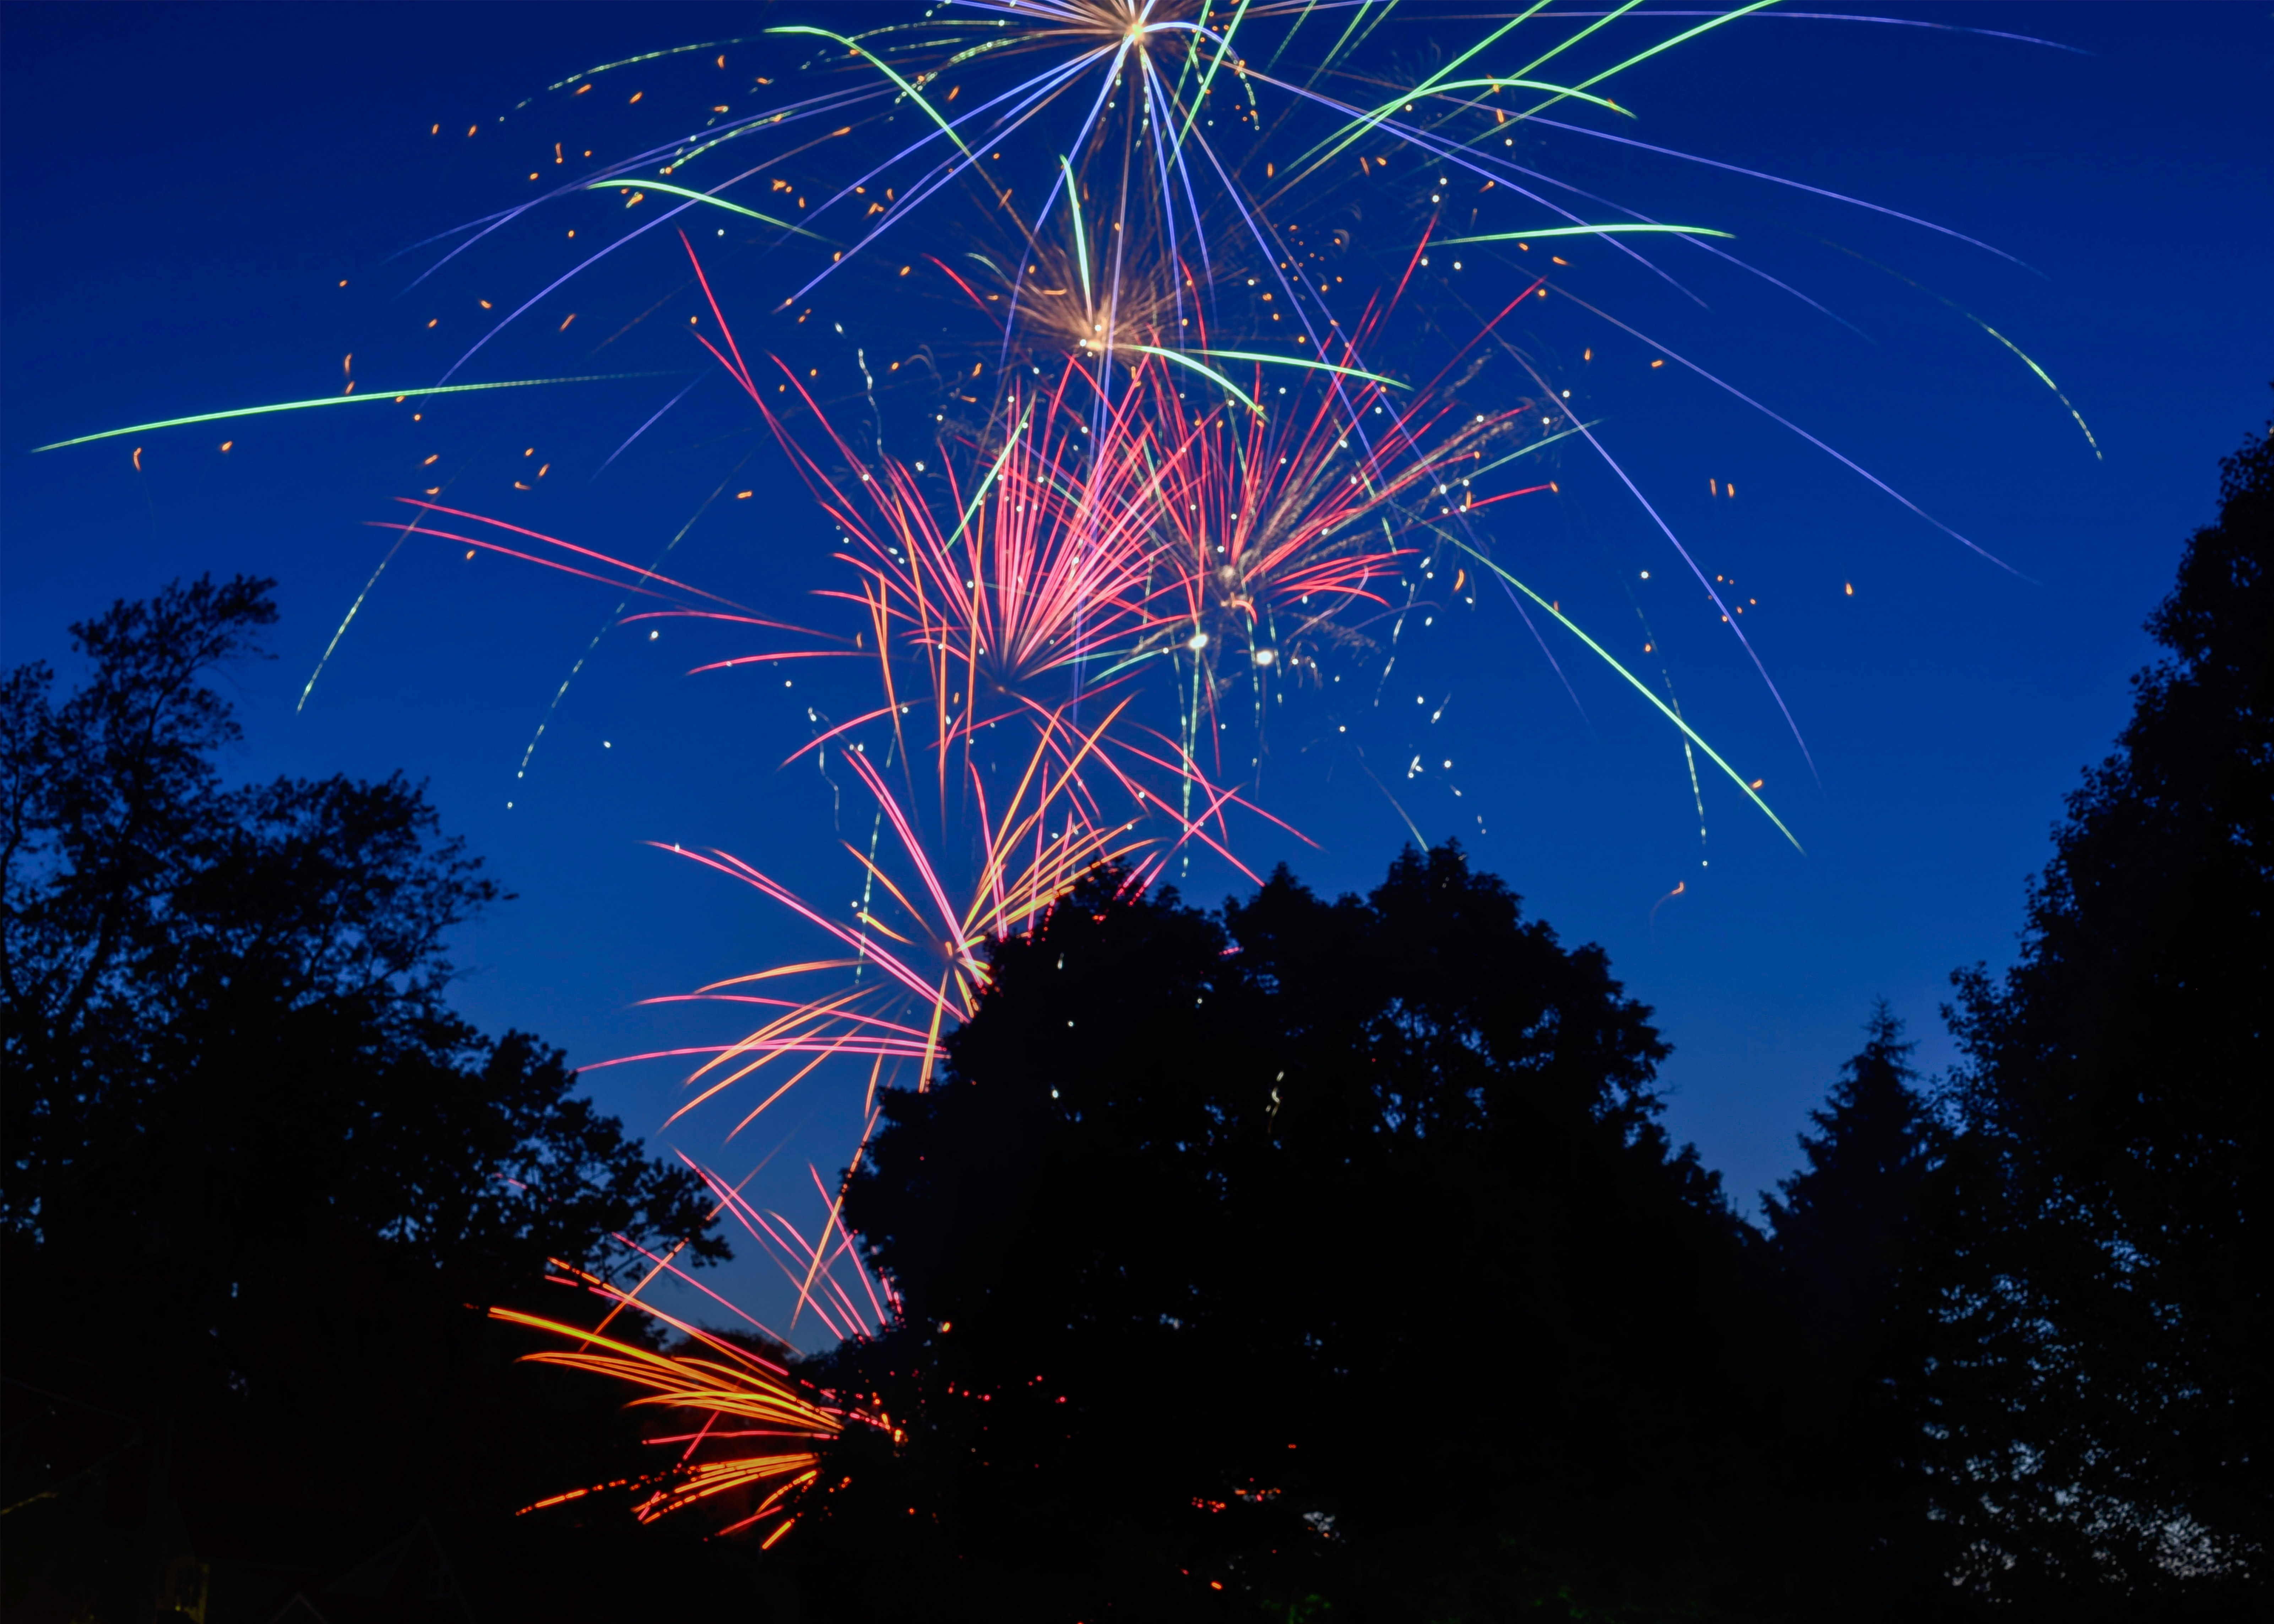 sparks, firework, holidays, trees, salute, holiday, fireworks High Definition image